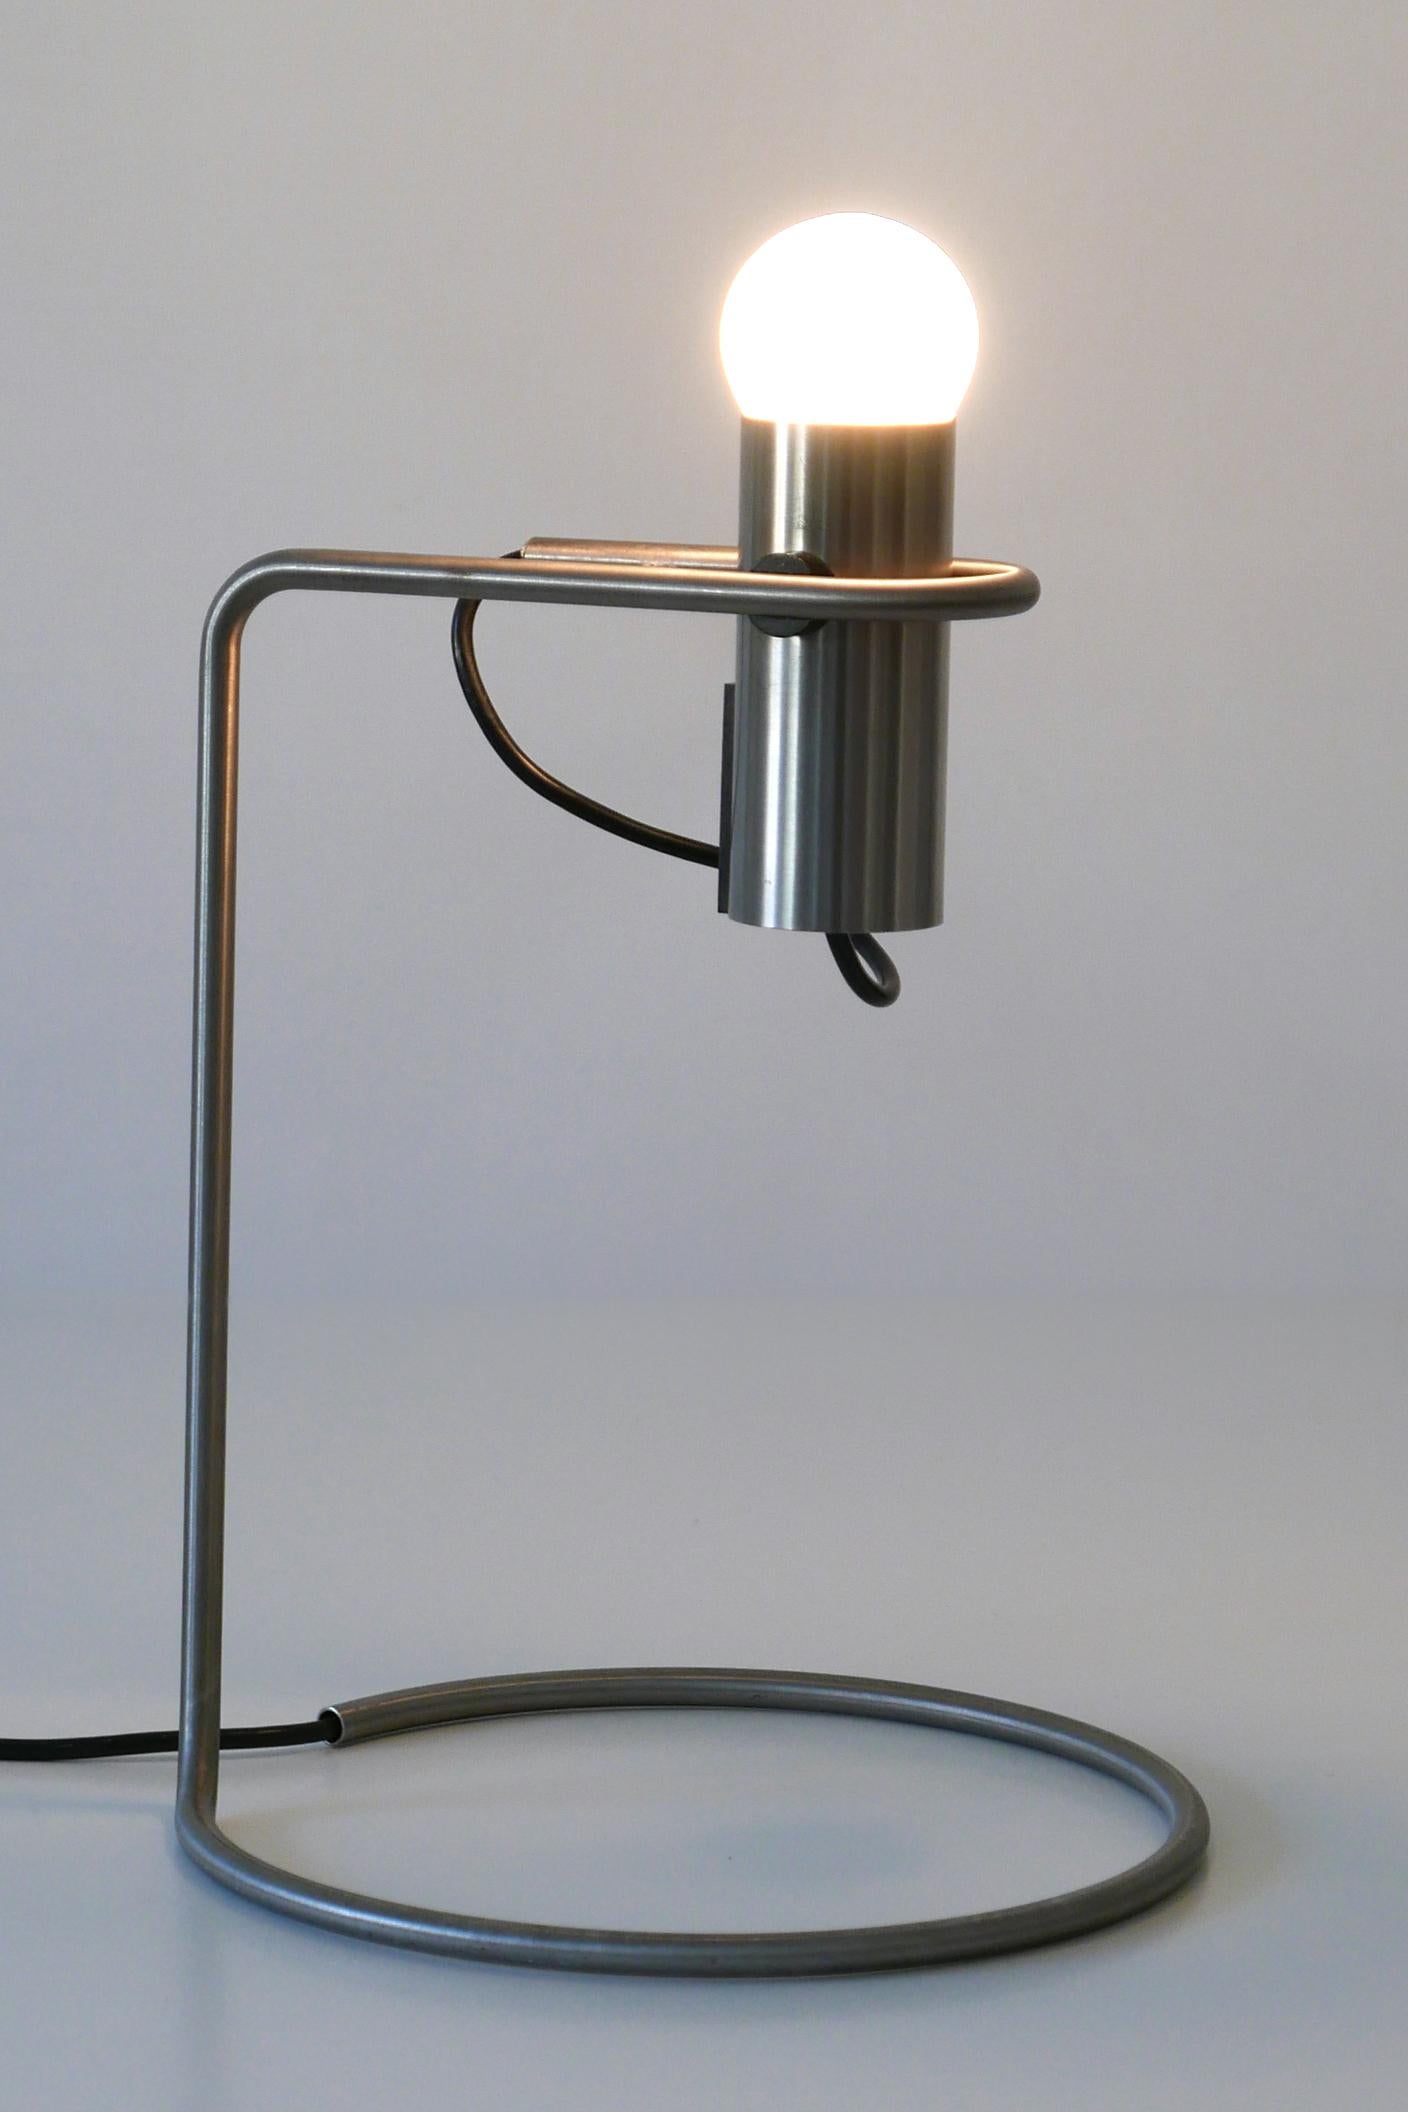 Exceptional Minimalistic Mid-Century Modern Table Lamp or Desk Light, 1960s For Sale 9